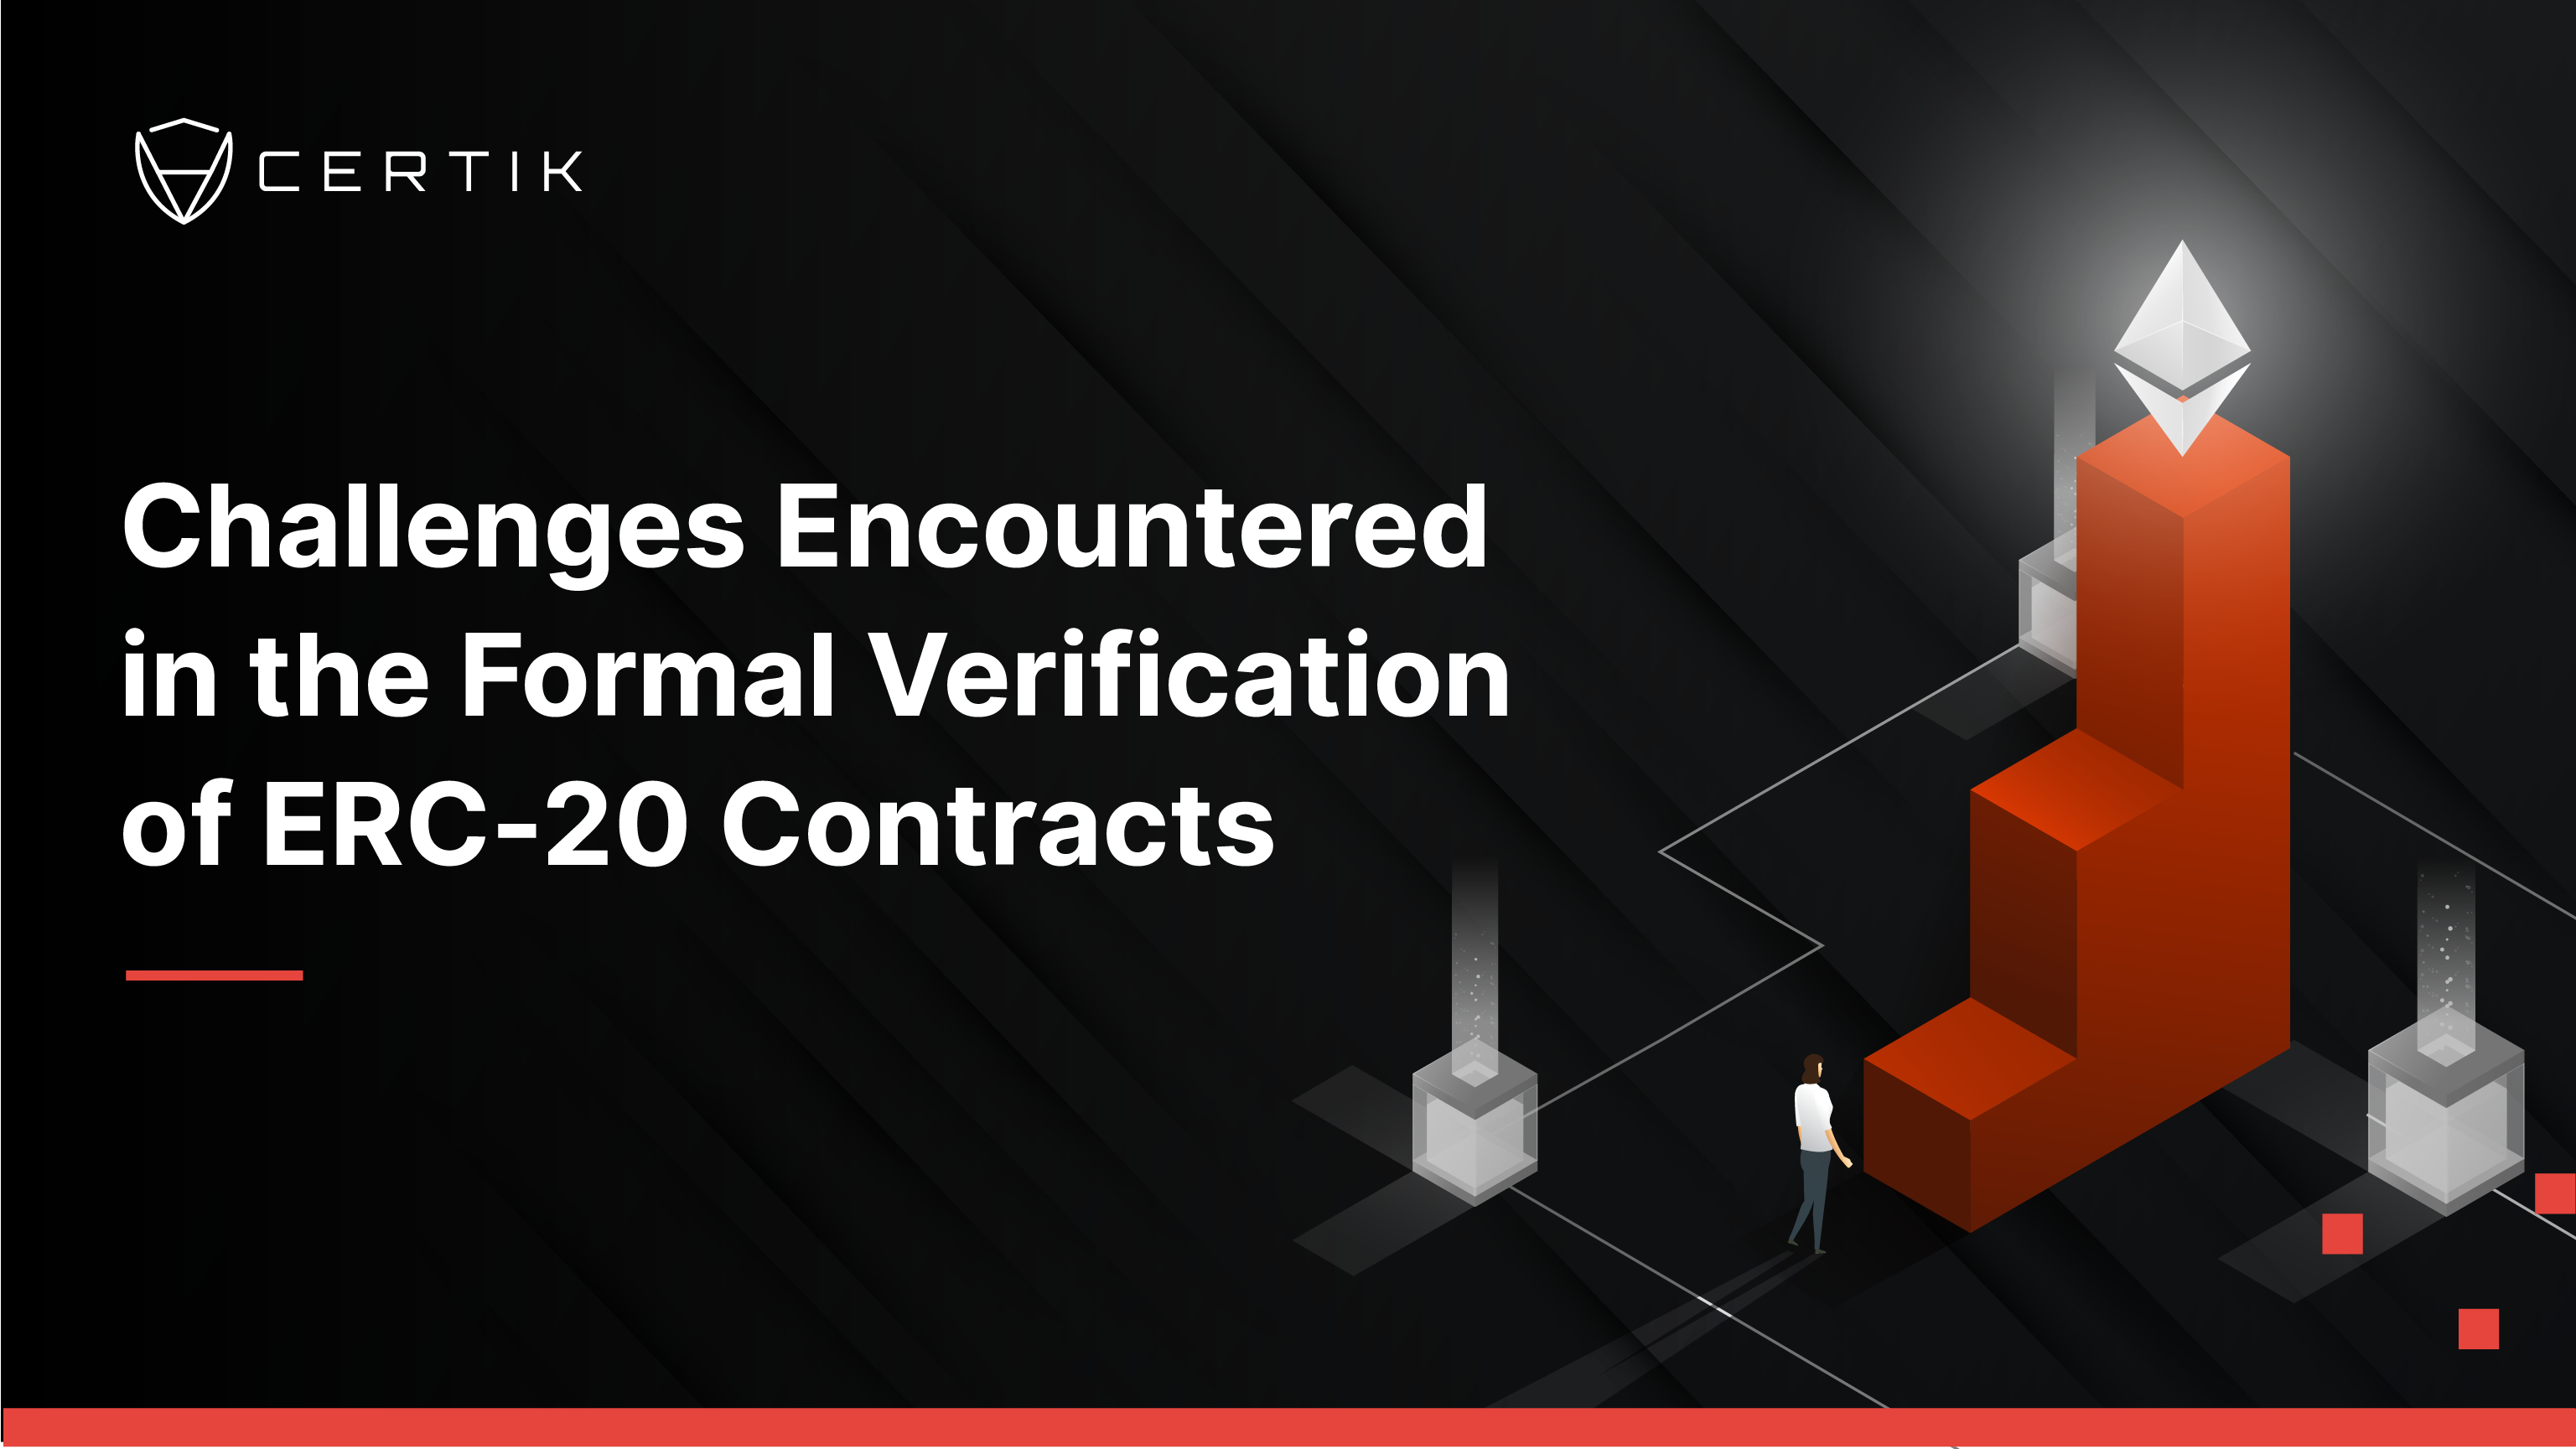 Challenges Encountered In the Formal Verification of ERC-20 Contracts